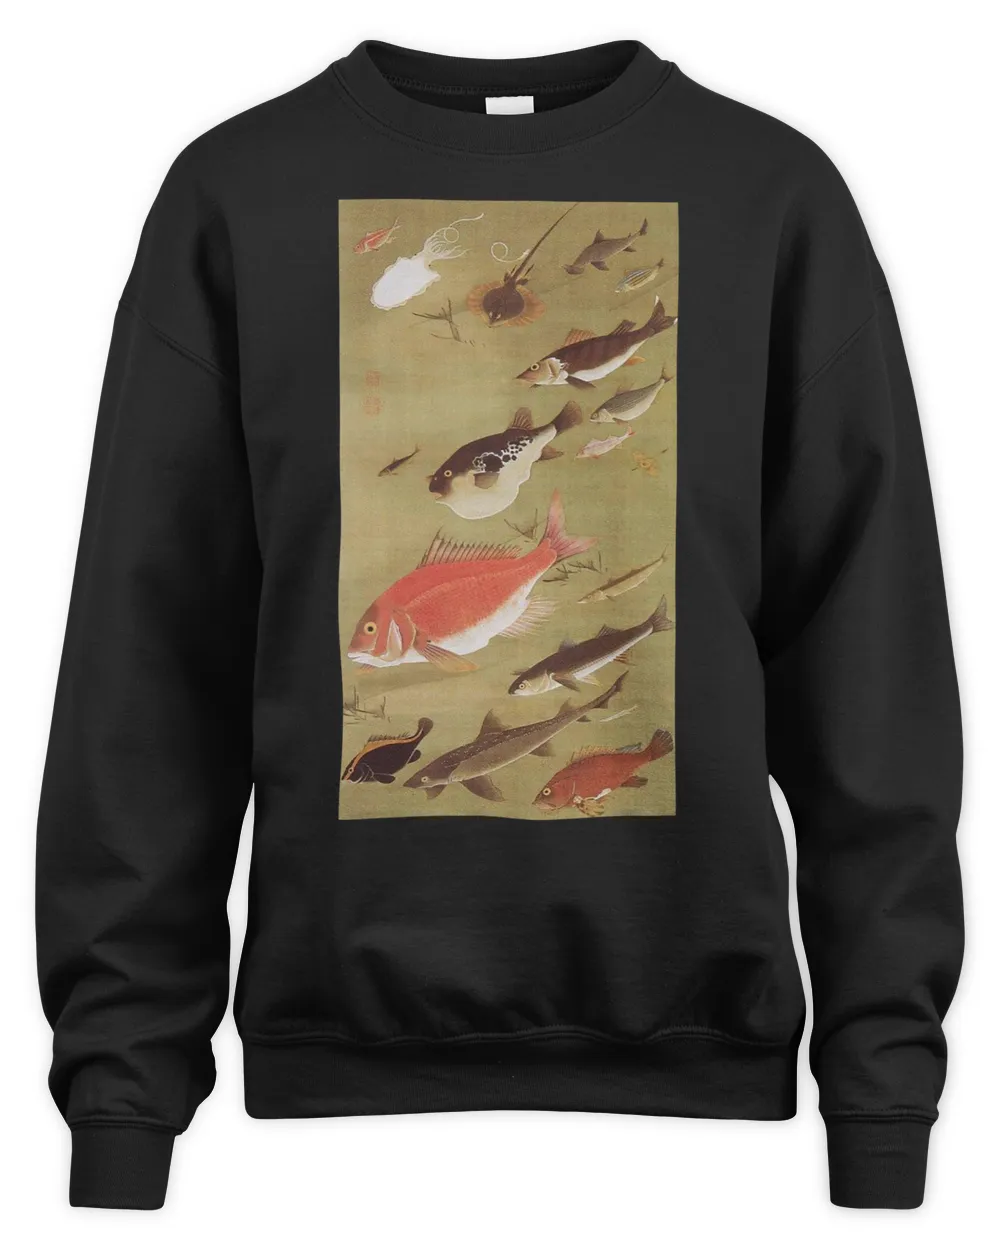 Fish Artistic Tee for Japanese Arts Enthusiasts